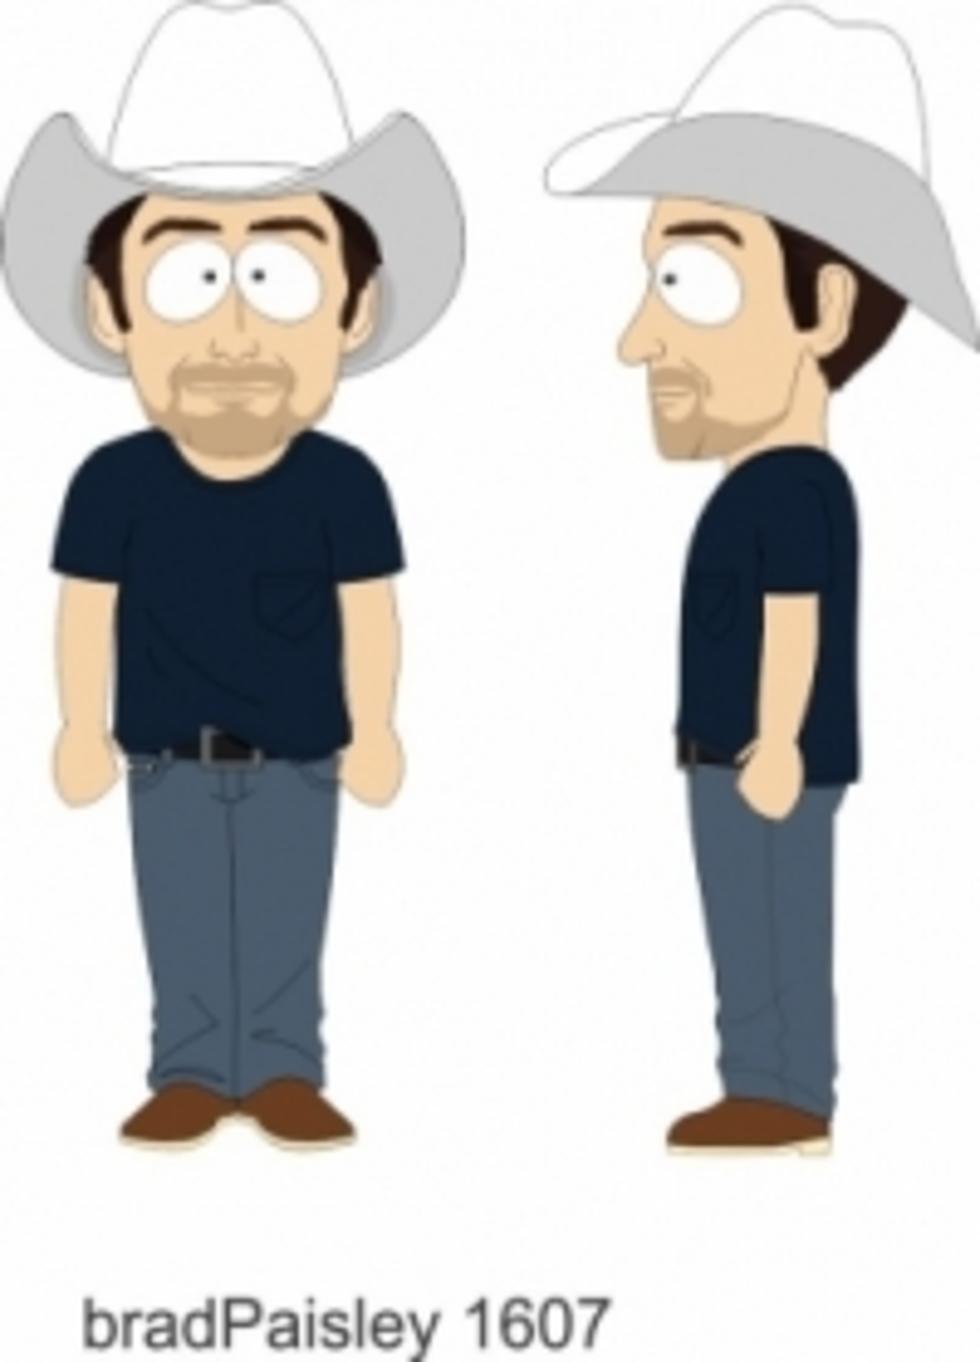 Brad Paisley Makes Guest Appearance on South Park Tonight